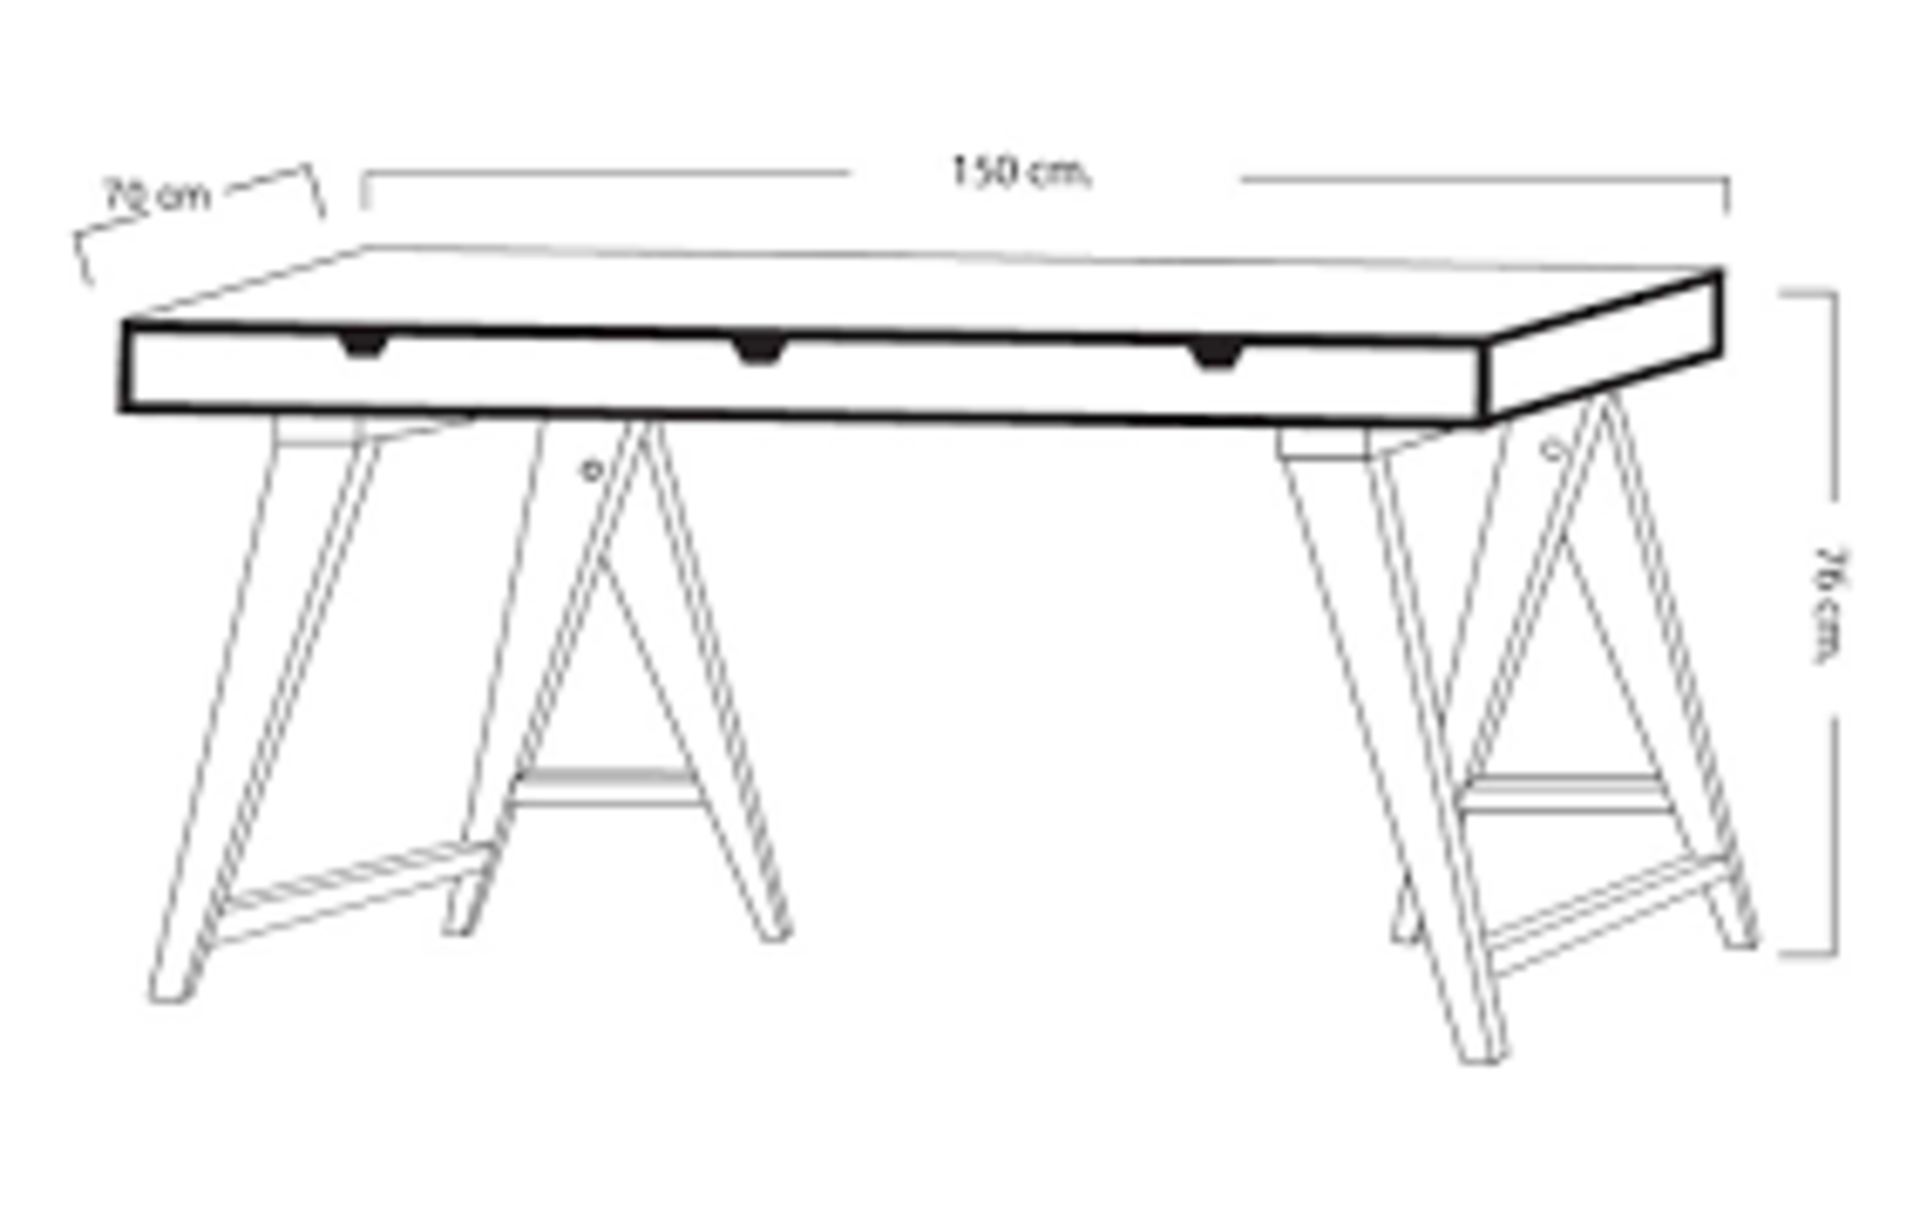 4 x Blue Suntree Ellwood Trestle Office Desks in White With Wooden Legs - Unchecked Customer Returns - Image 4 of 4